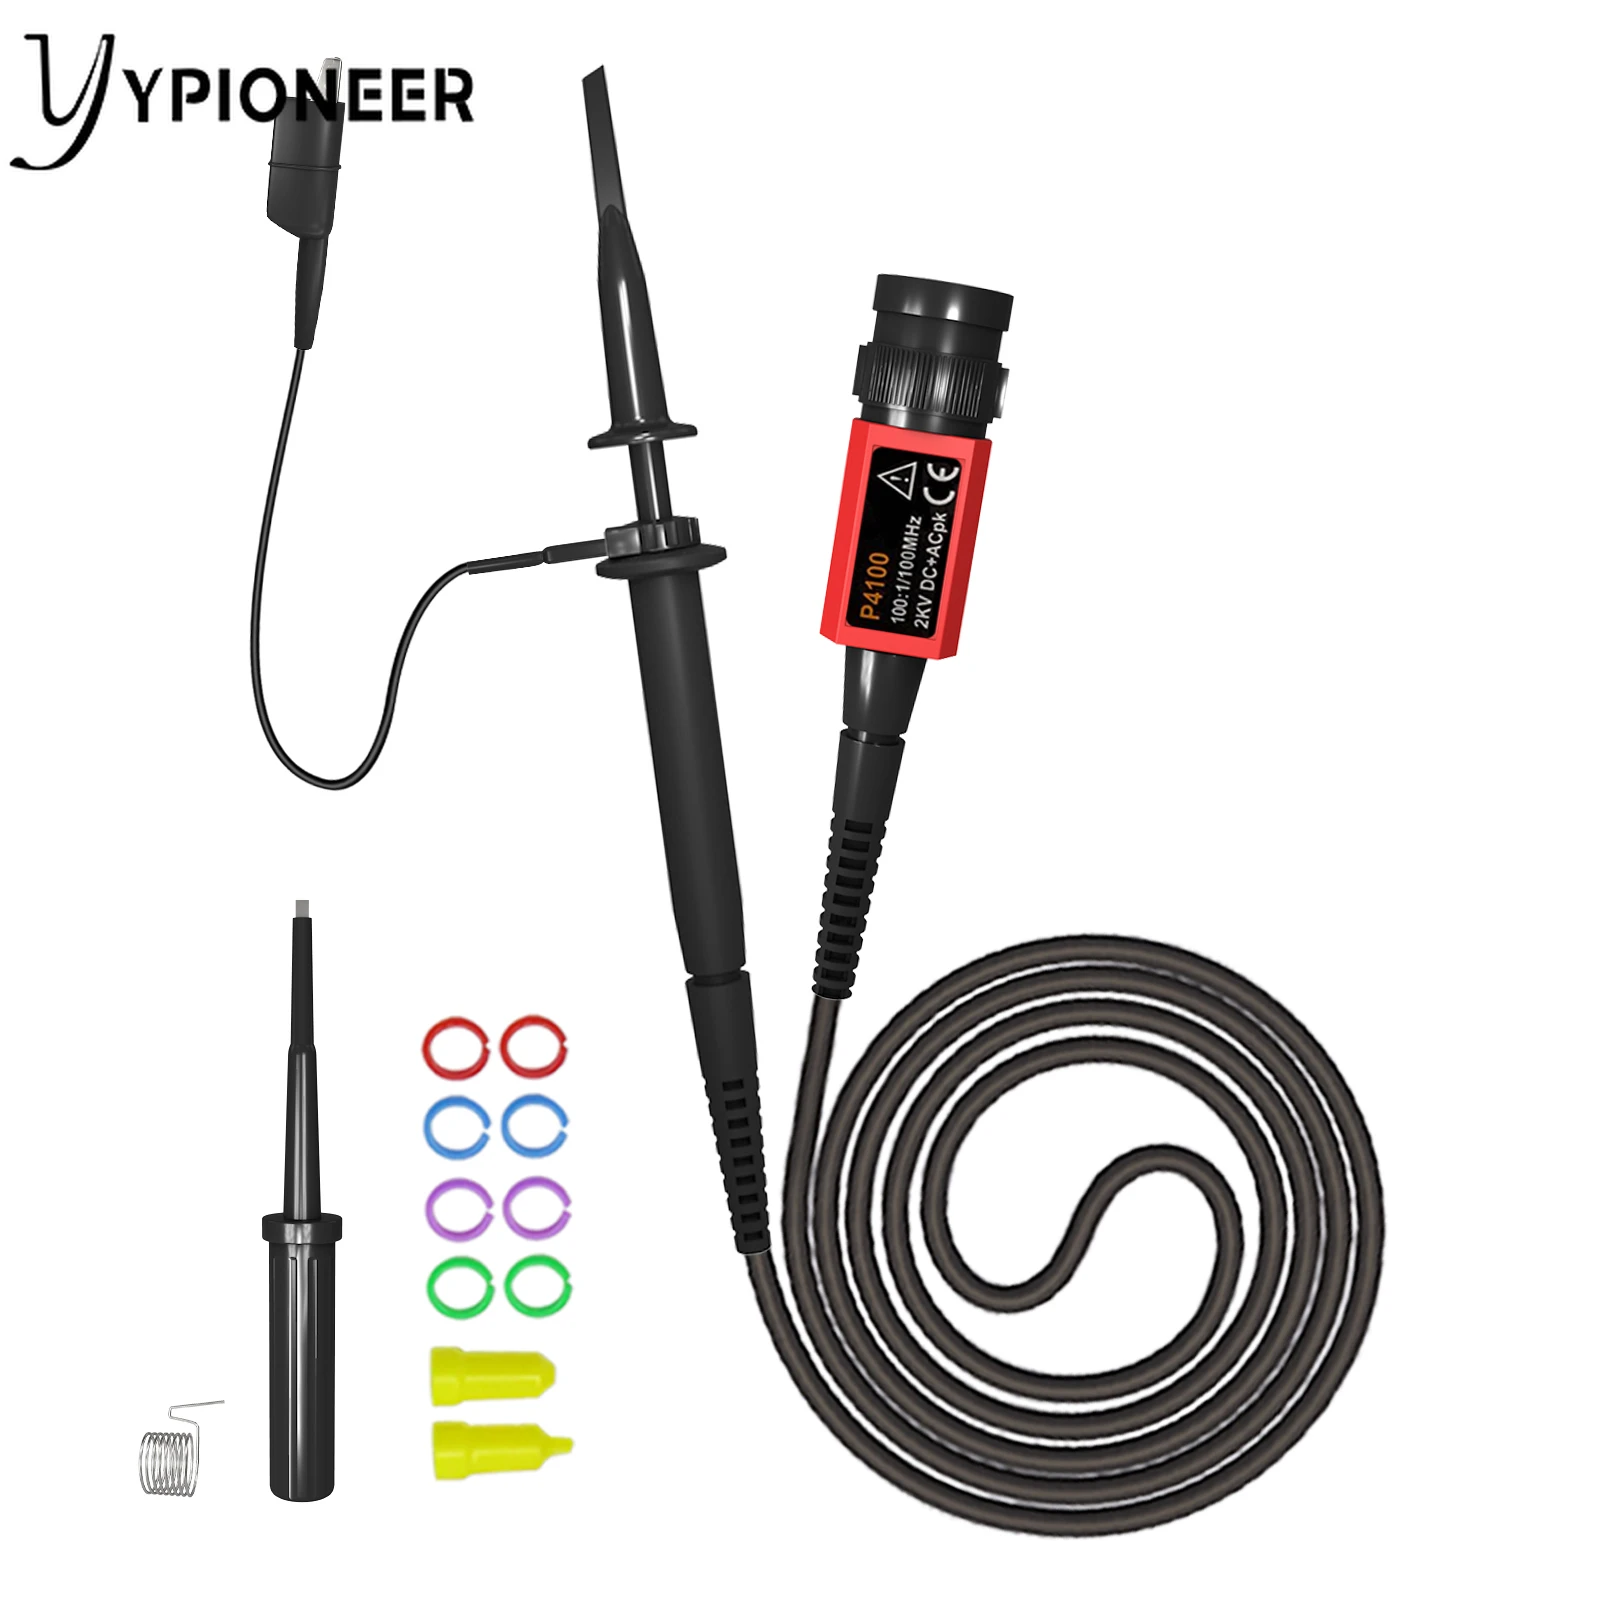 YPioneer High Voltage Oscilloscope Probe P4100 with Accessory Kit 100MHz 2000V 100:1